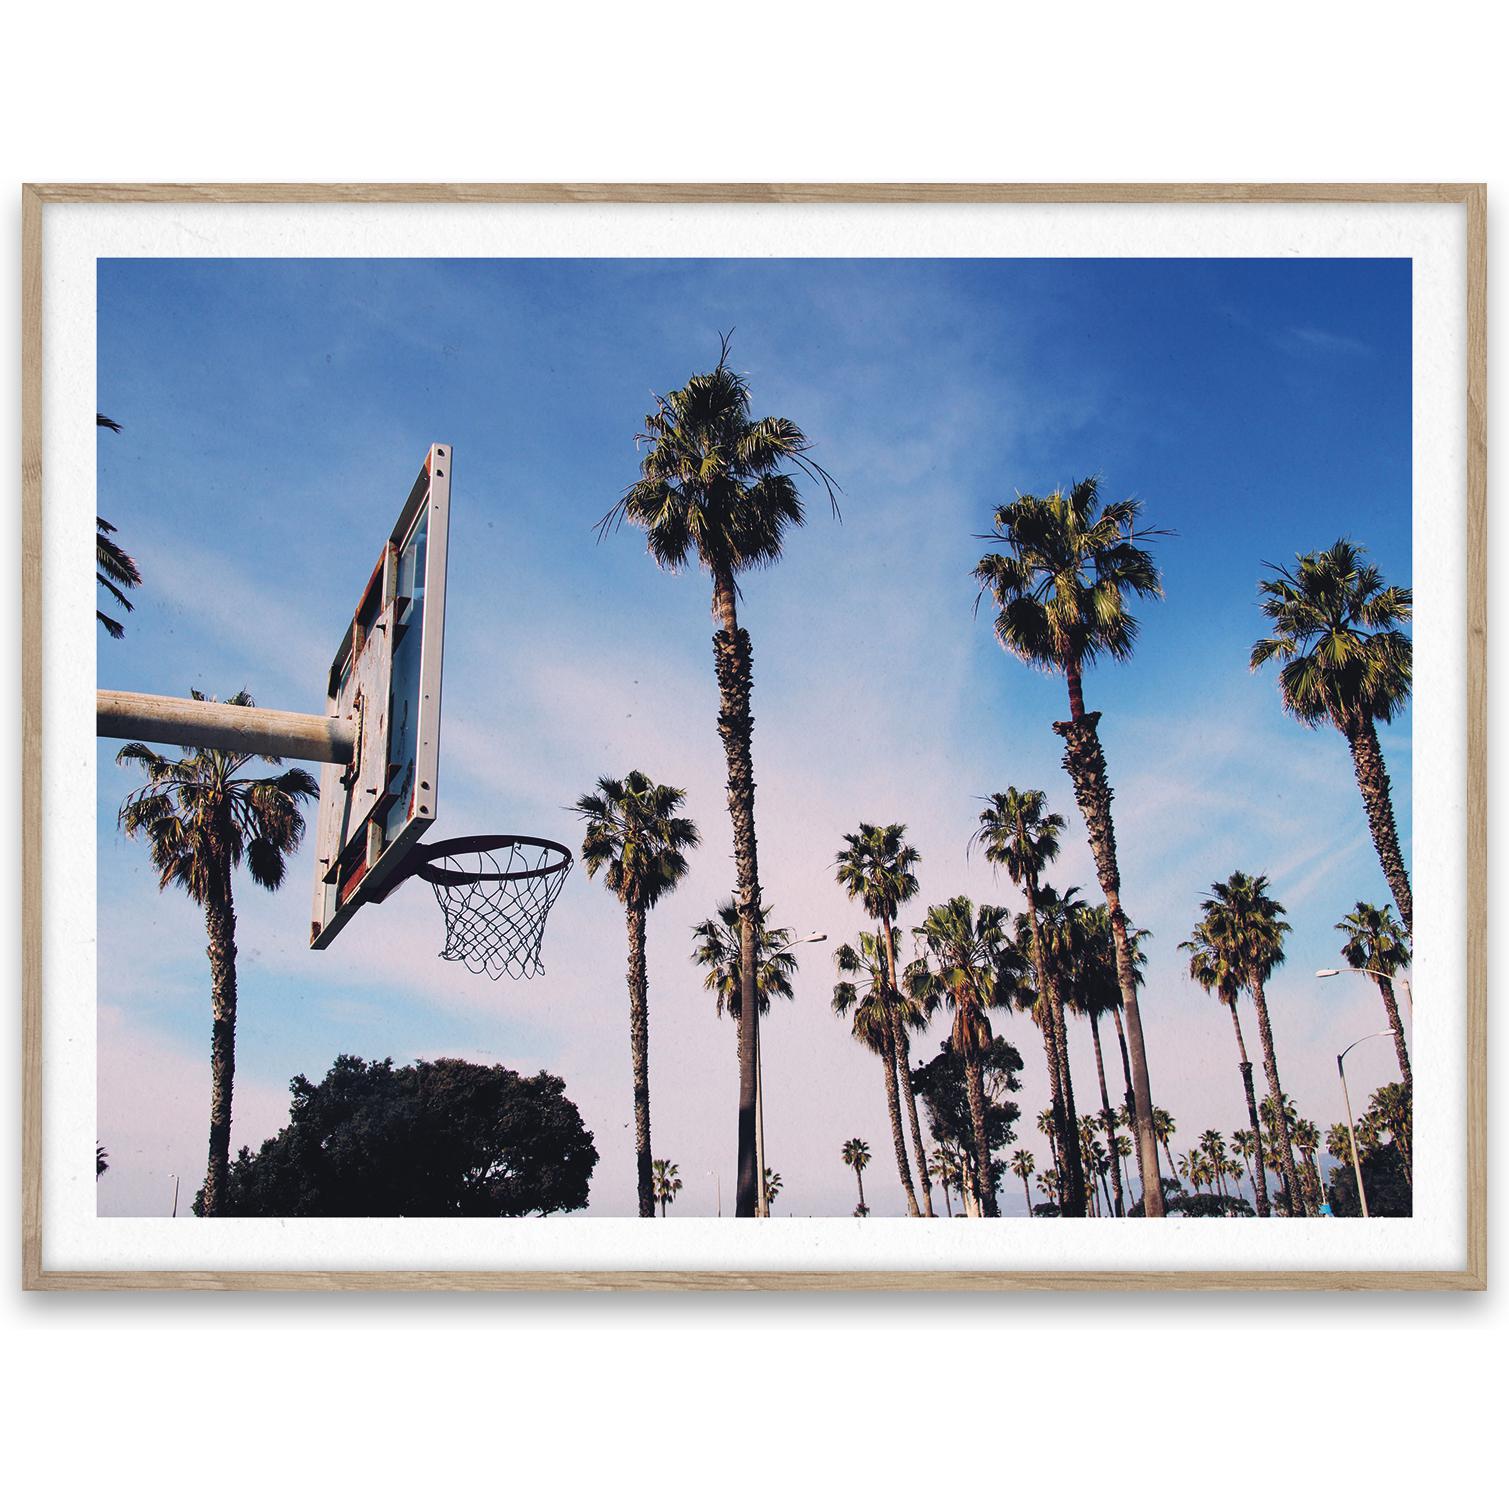 Paper Collective Cities of Basketball 02, Los Angeles Affiche, 30x40 cm